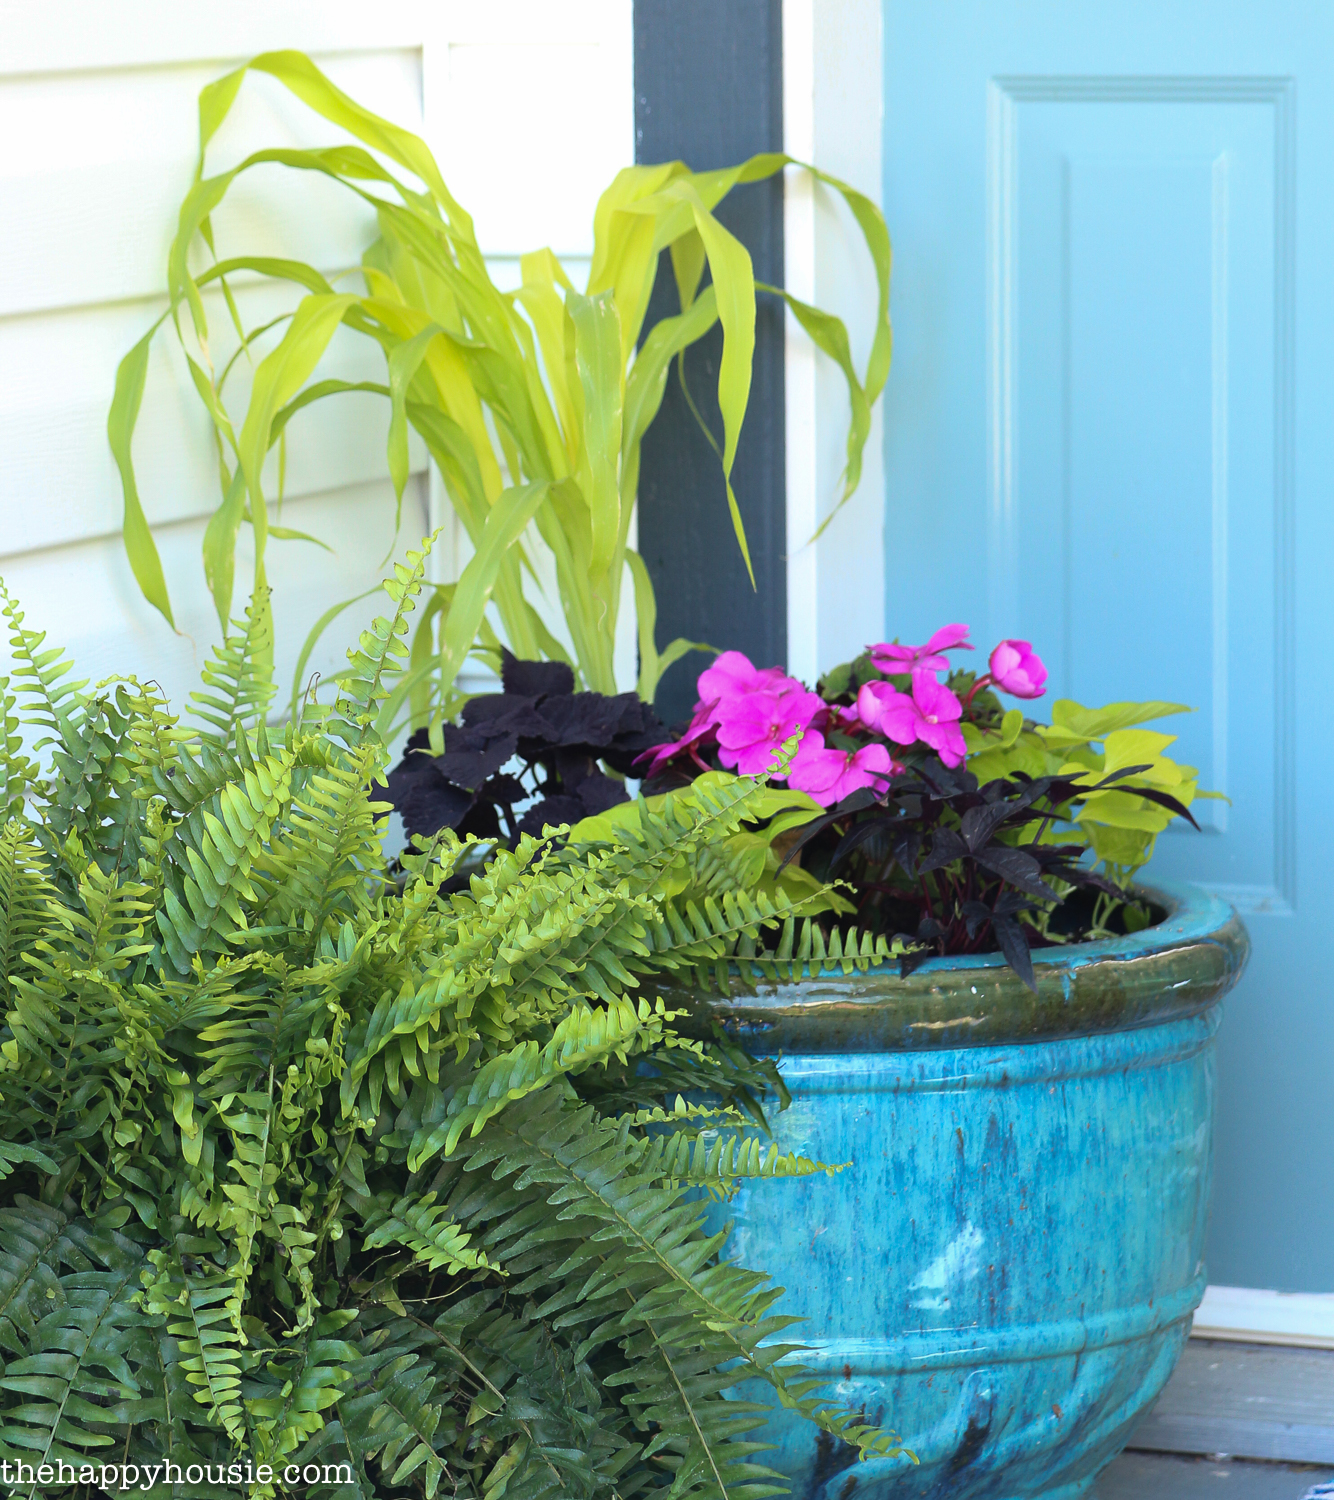 There are potted pink plants and green plants in a blue planter on the front porch.